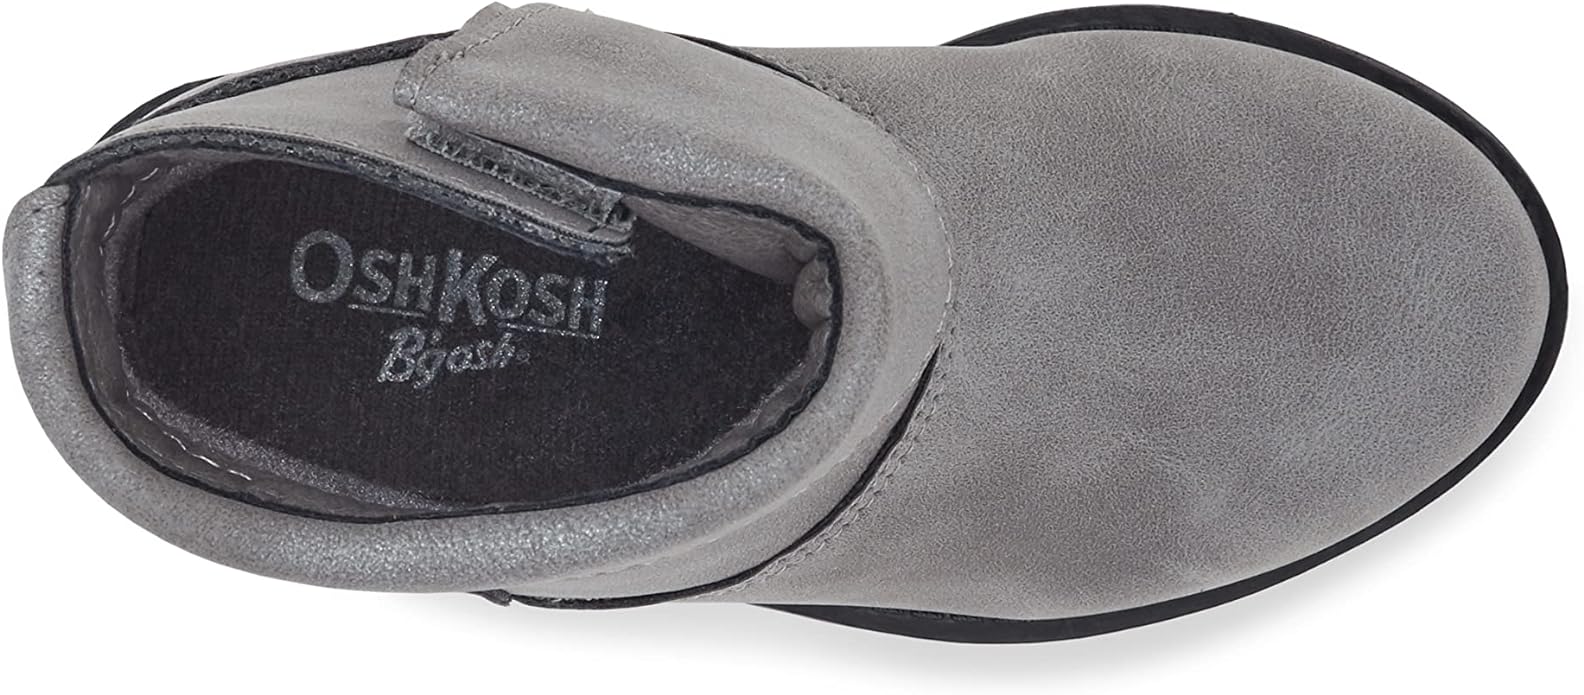 Toddler Girl Shoes Gray